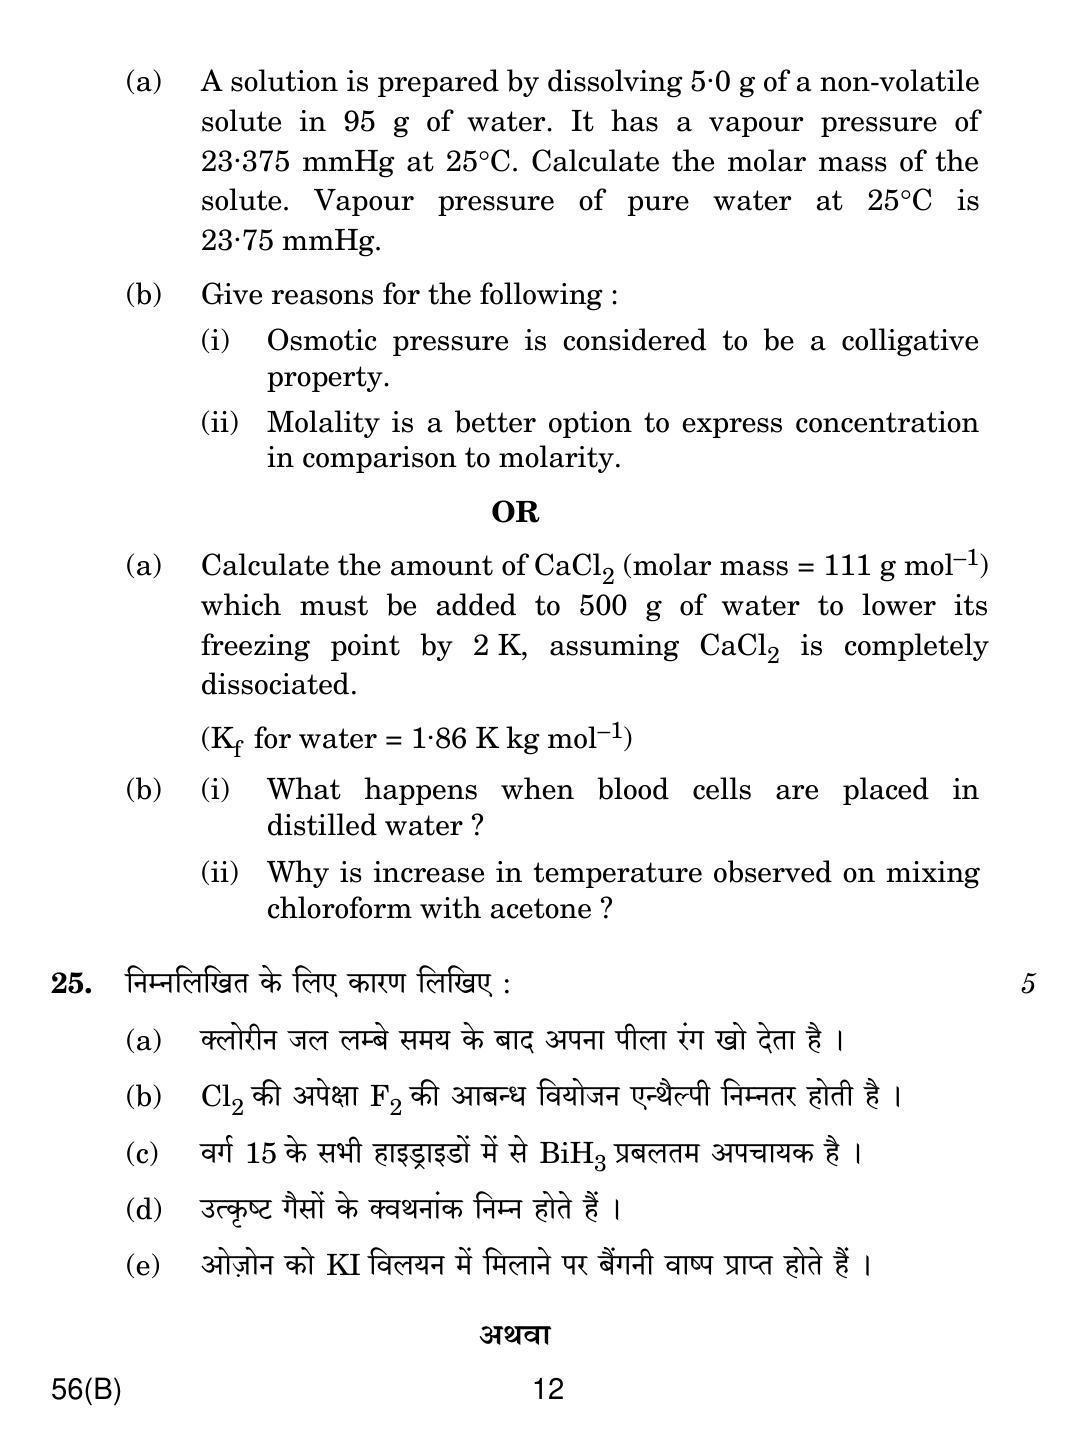 CBSE Class 12 56(B) CHEMISTRY FOR BLIND CANDIDATES 2018 Question Paper - Page 12